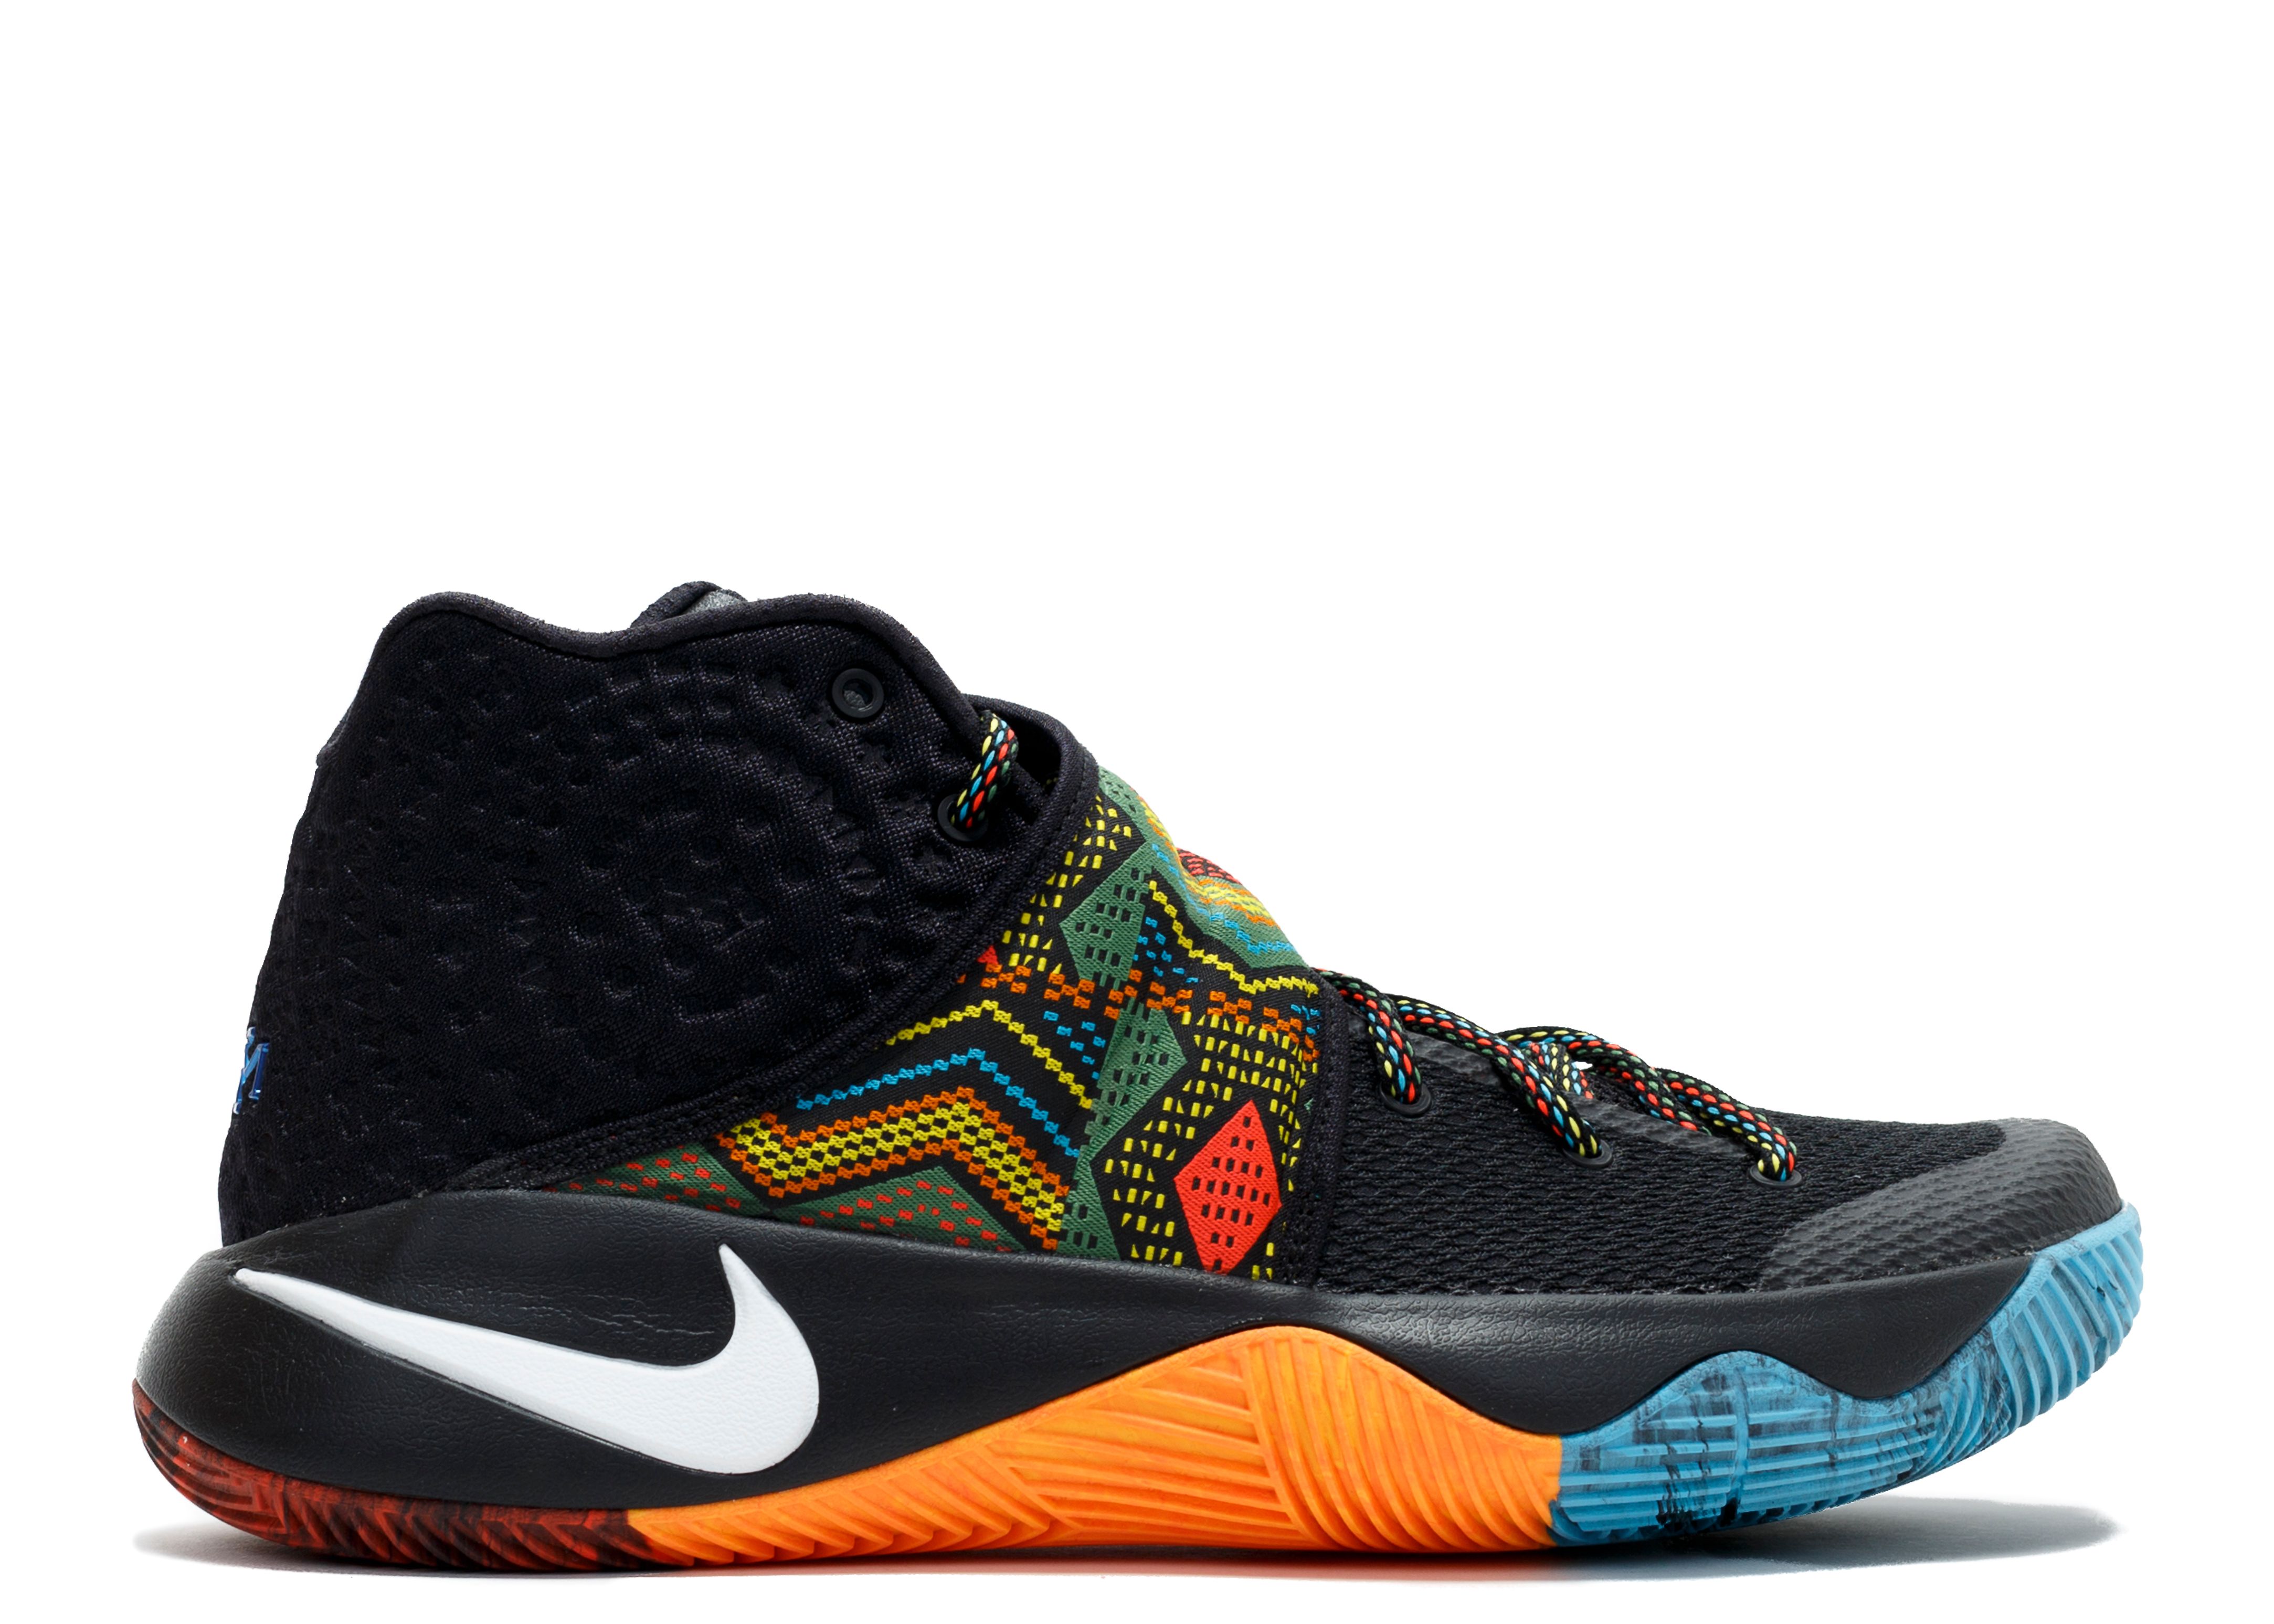 kyrie irving shoes 2016 black